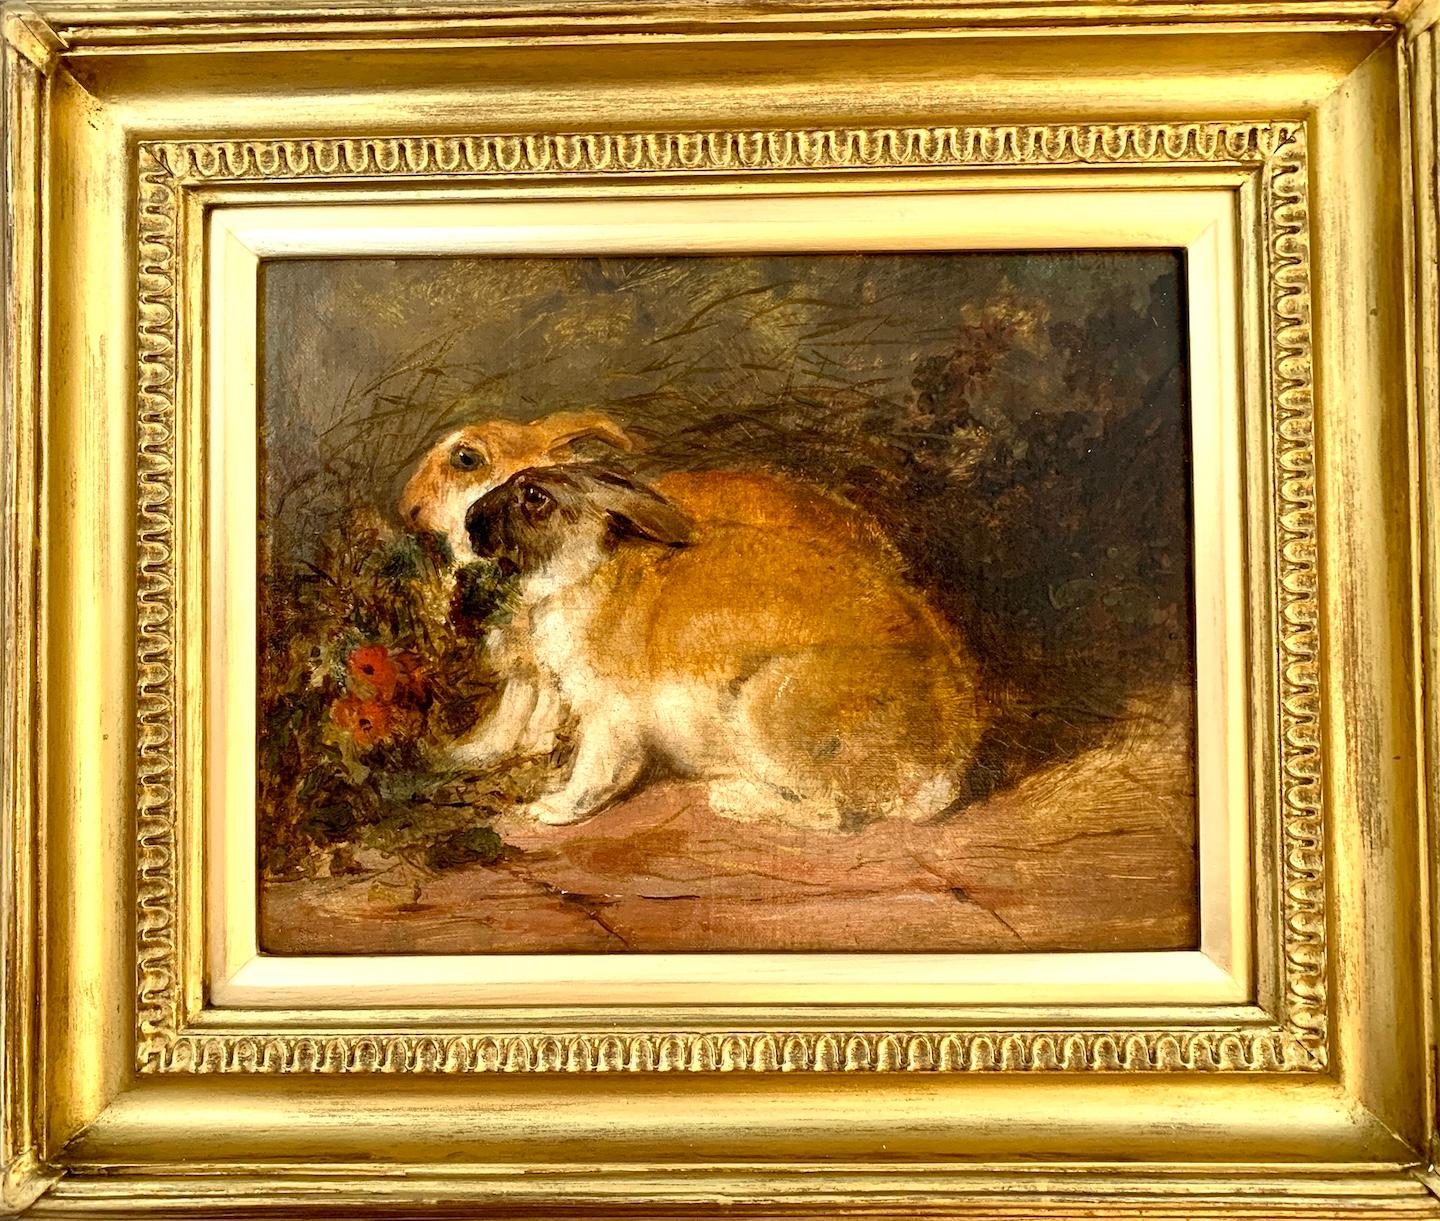 Thomas William Earl Animal Painting - 19th century English Antique oil  portrait of two Rabbits in an interior